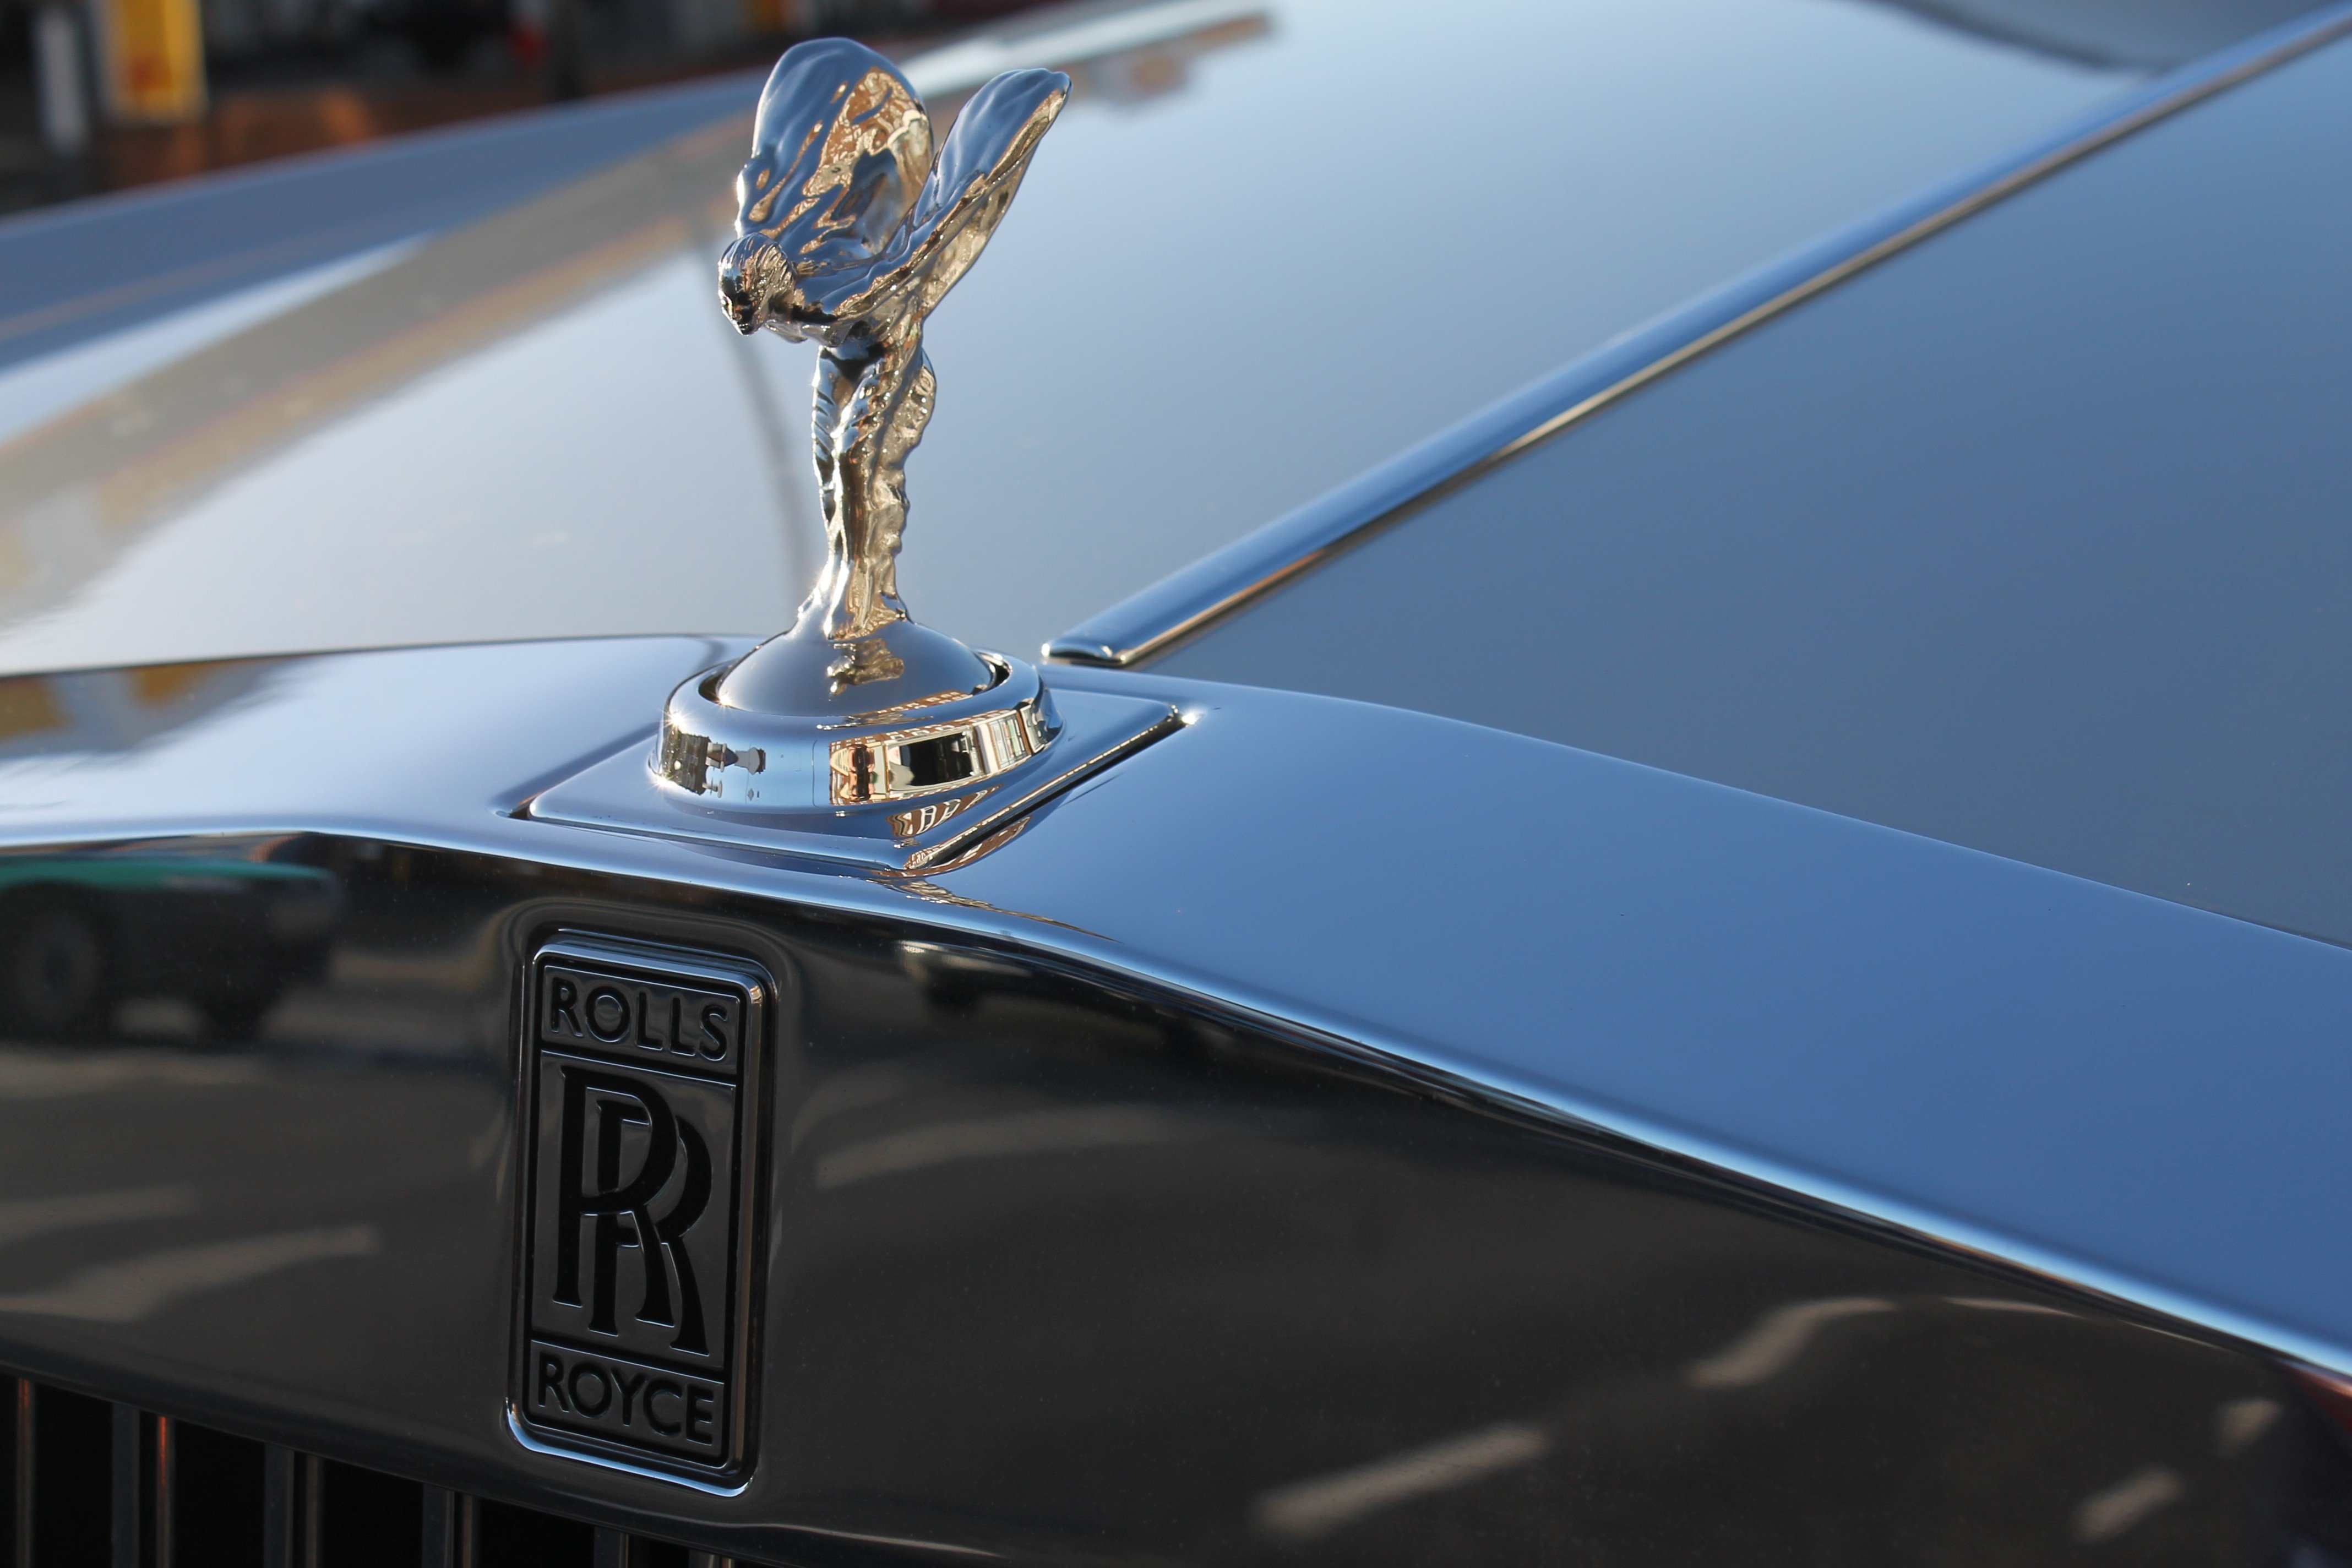 Rolls Royce Cars Hd Wallpapers Free Download